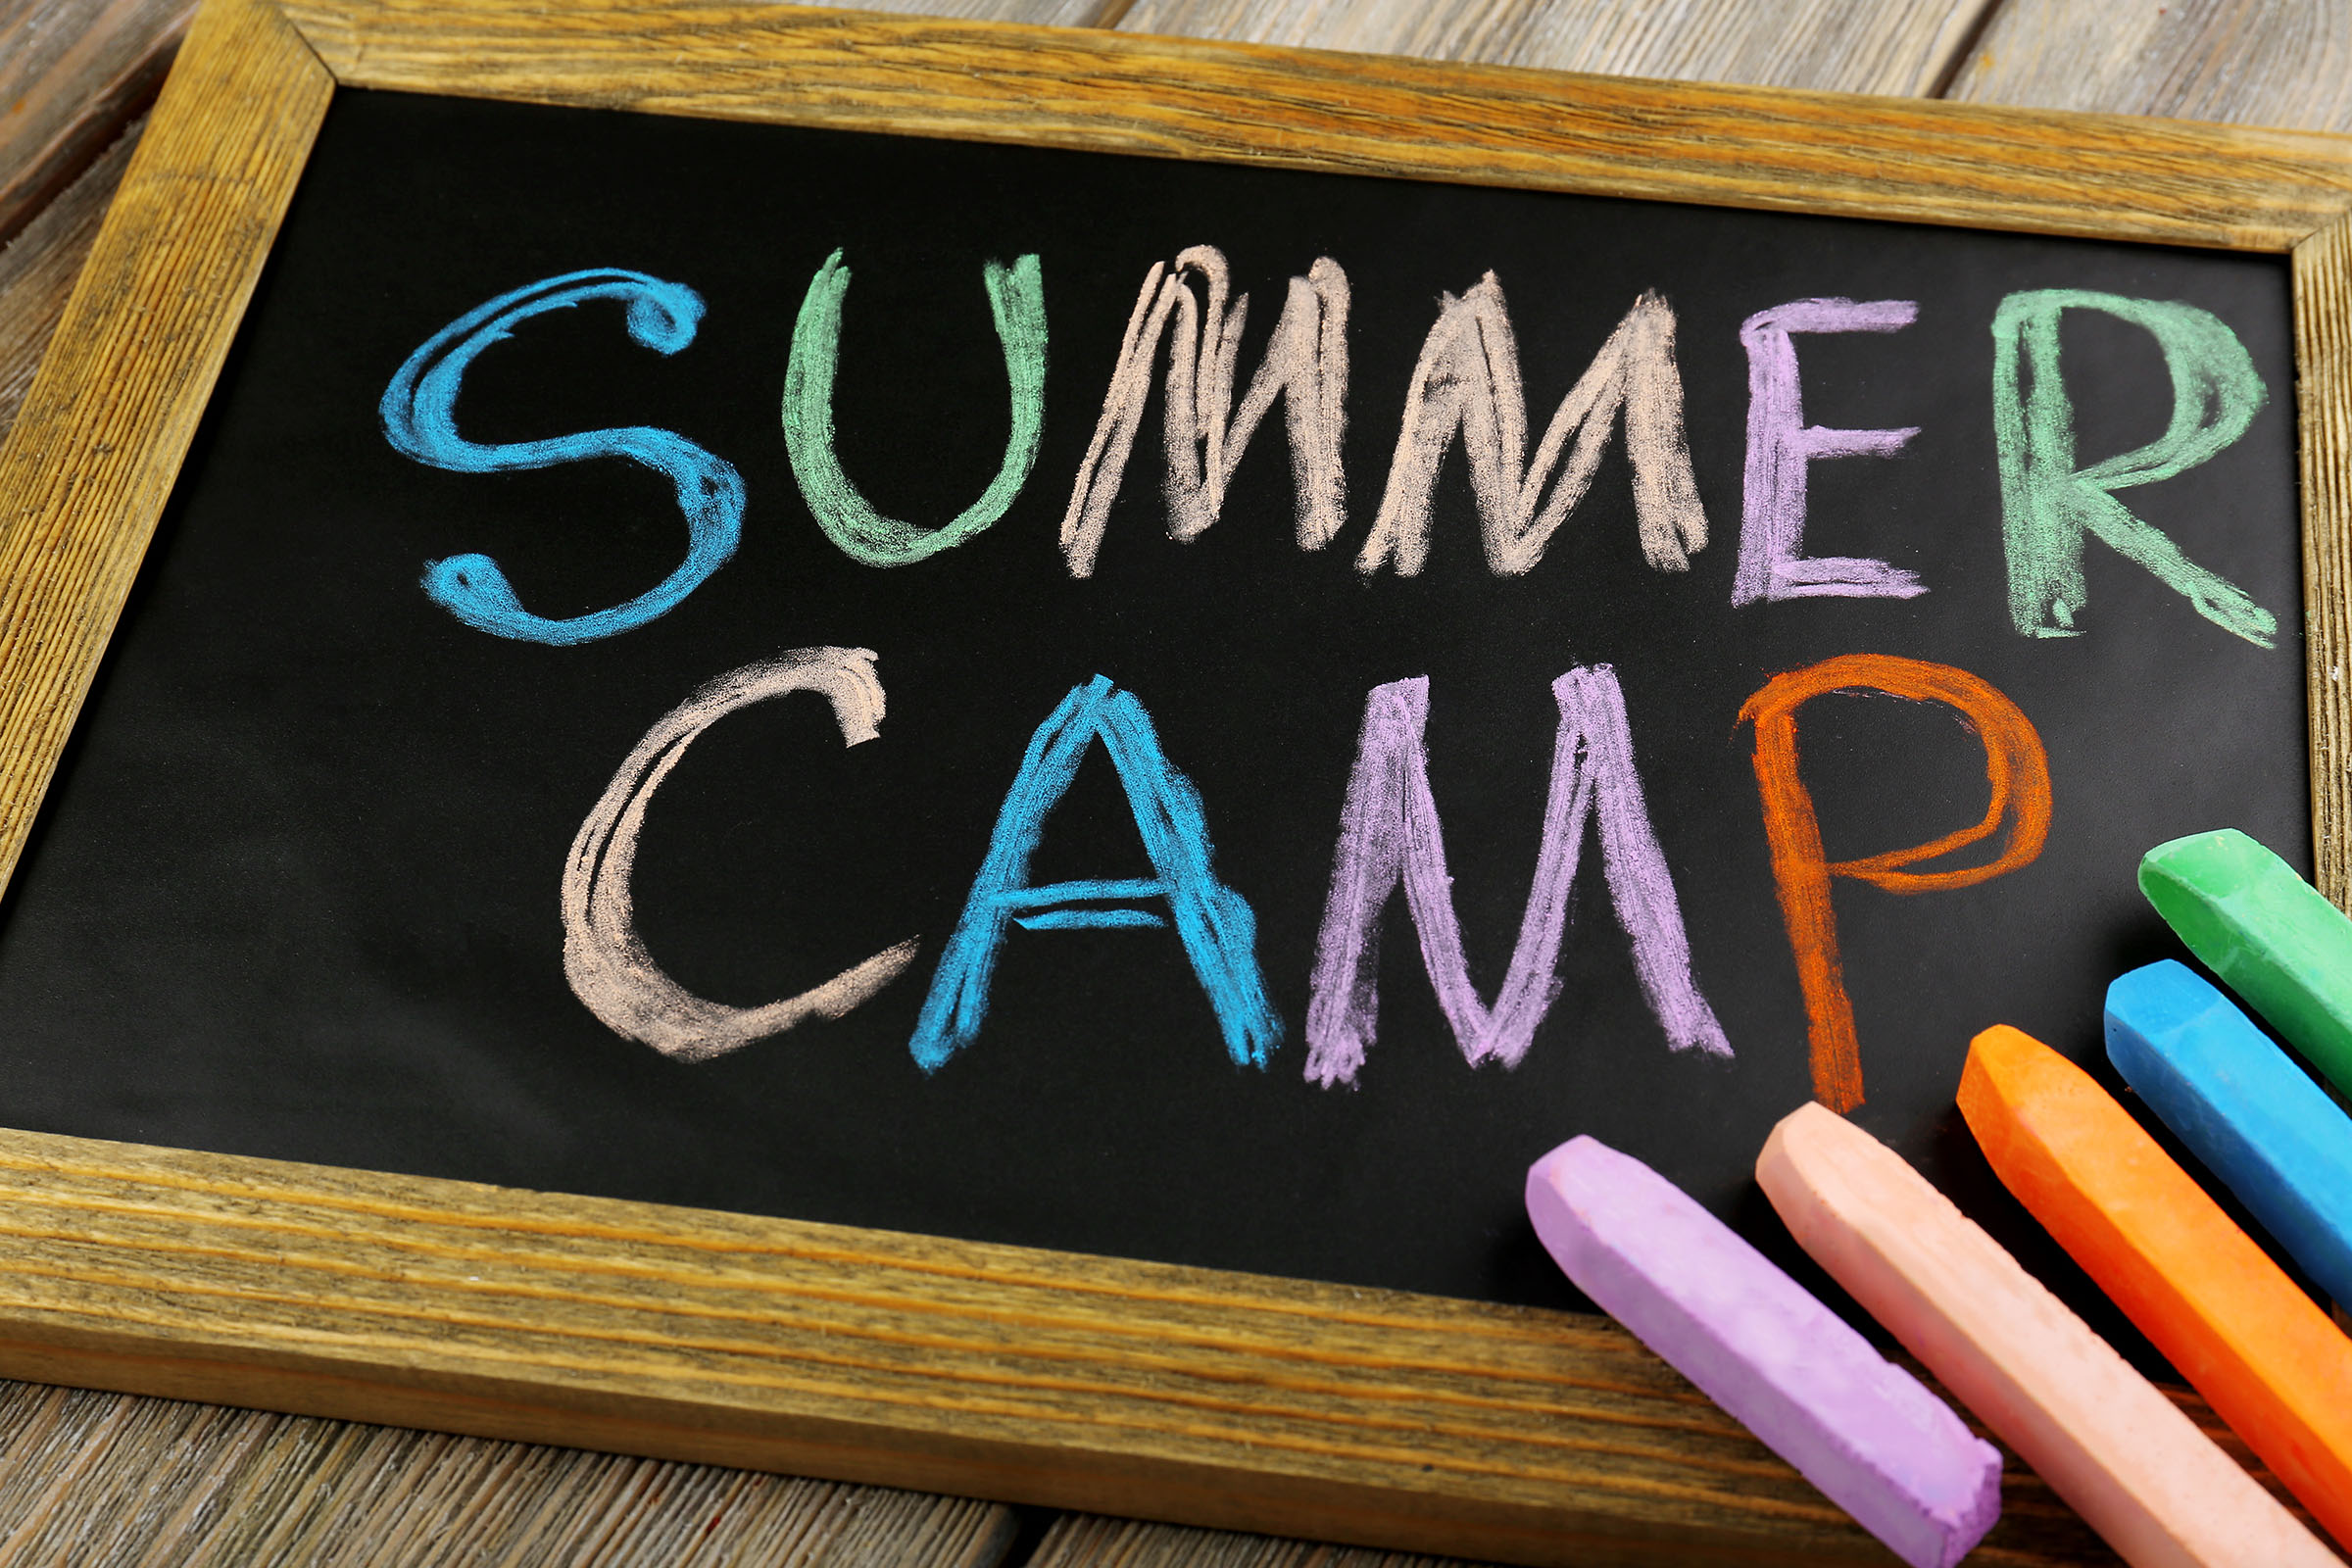 A chalk board with "Summer Camp" written in chalk.